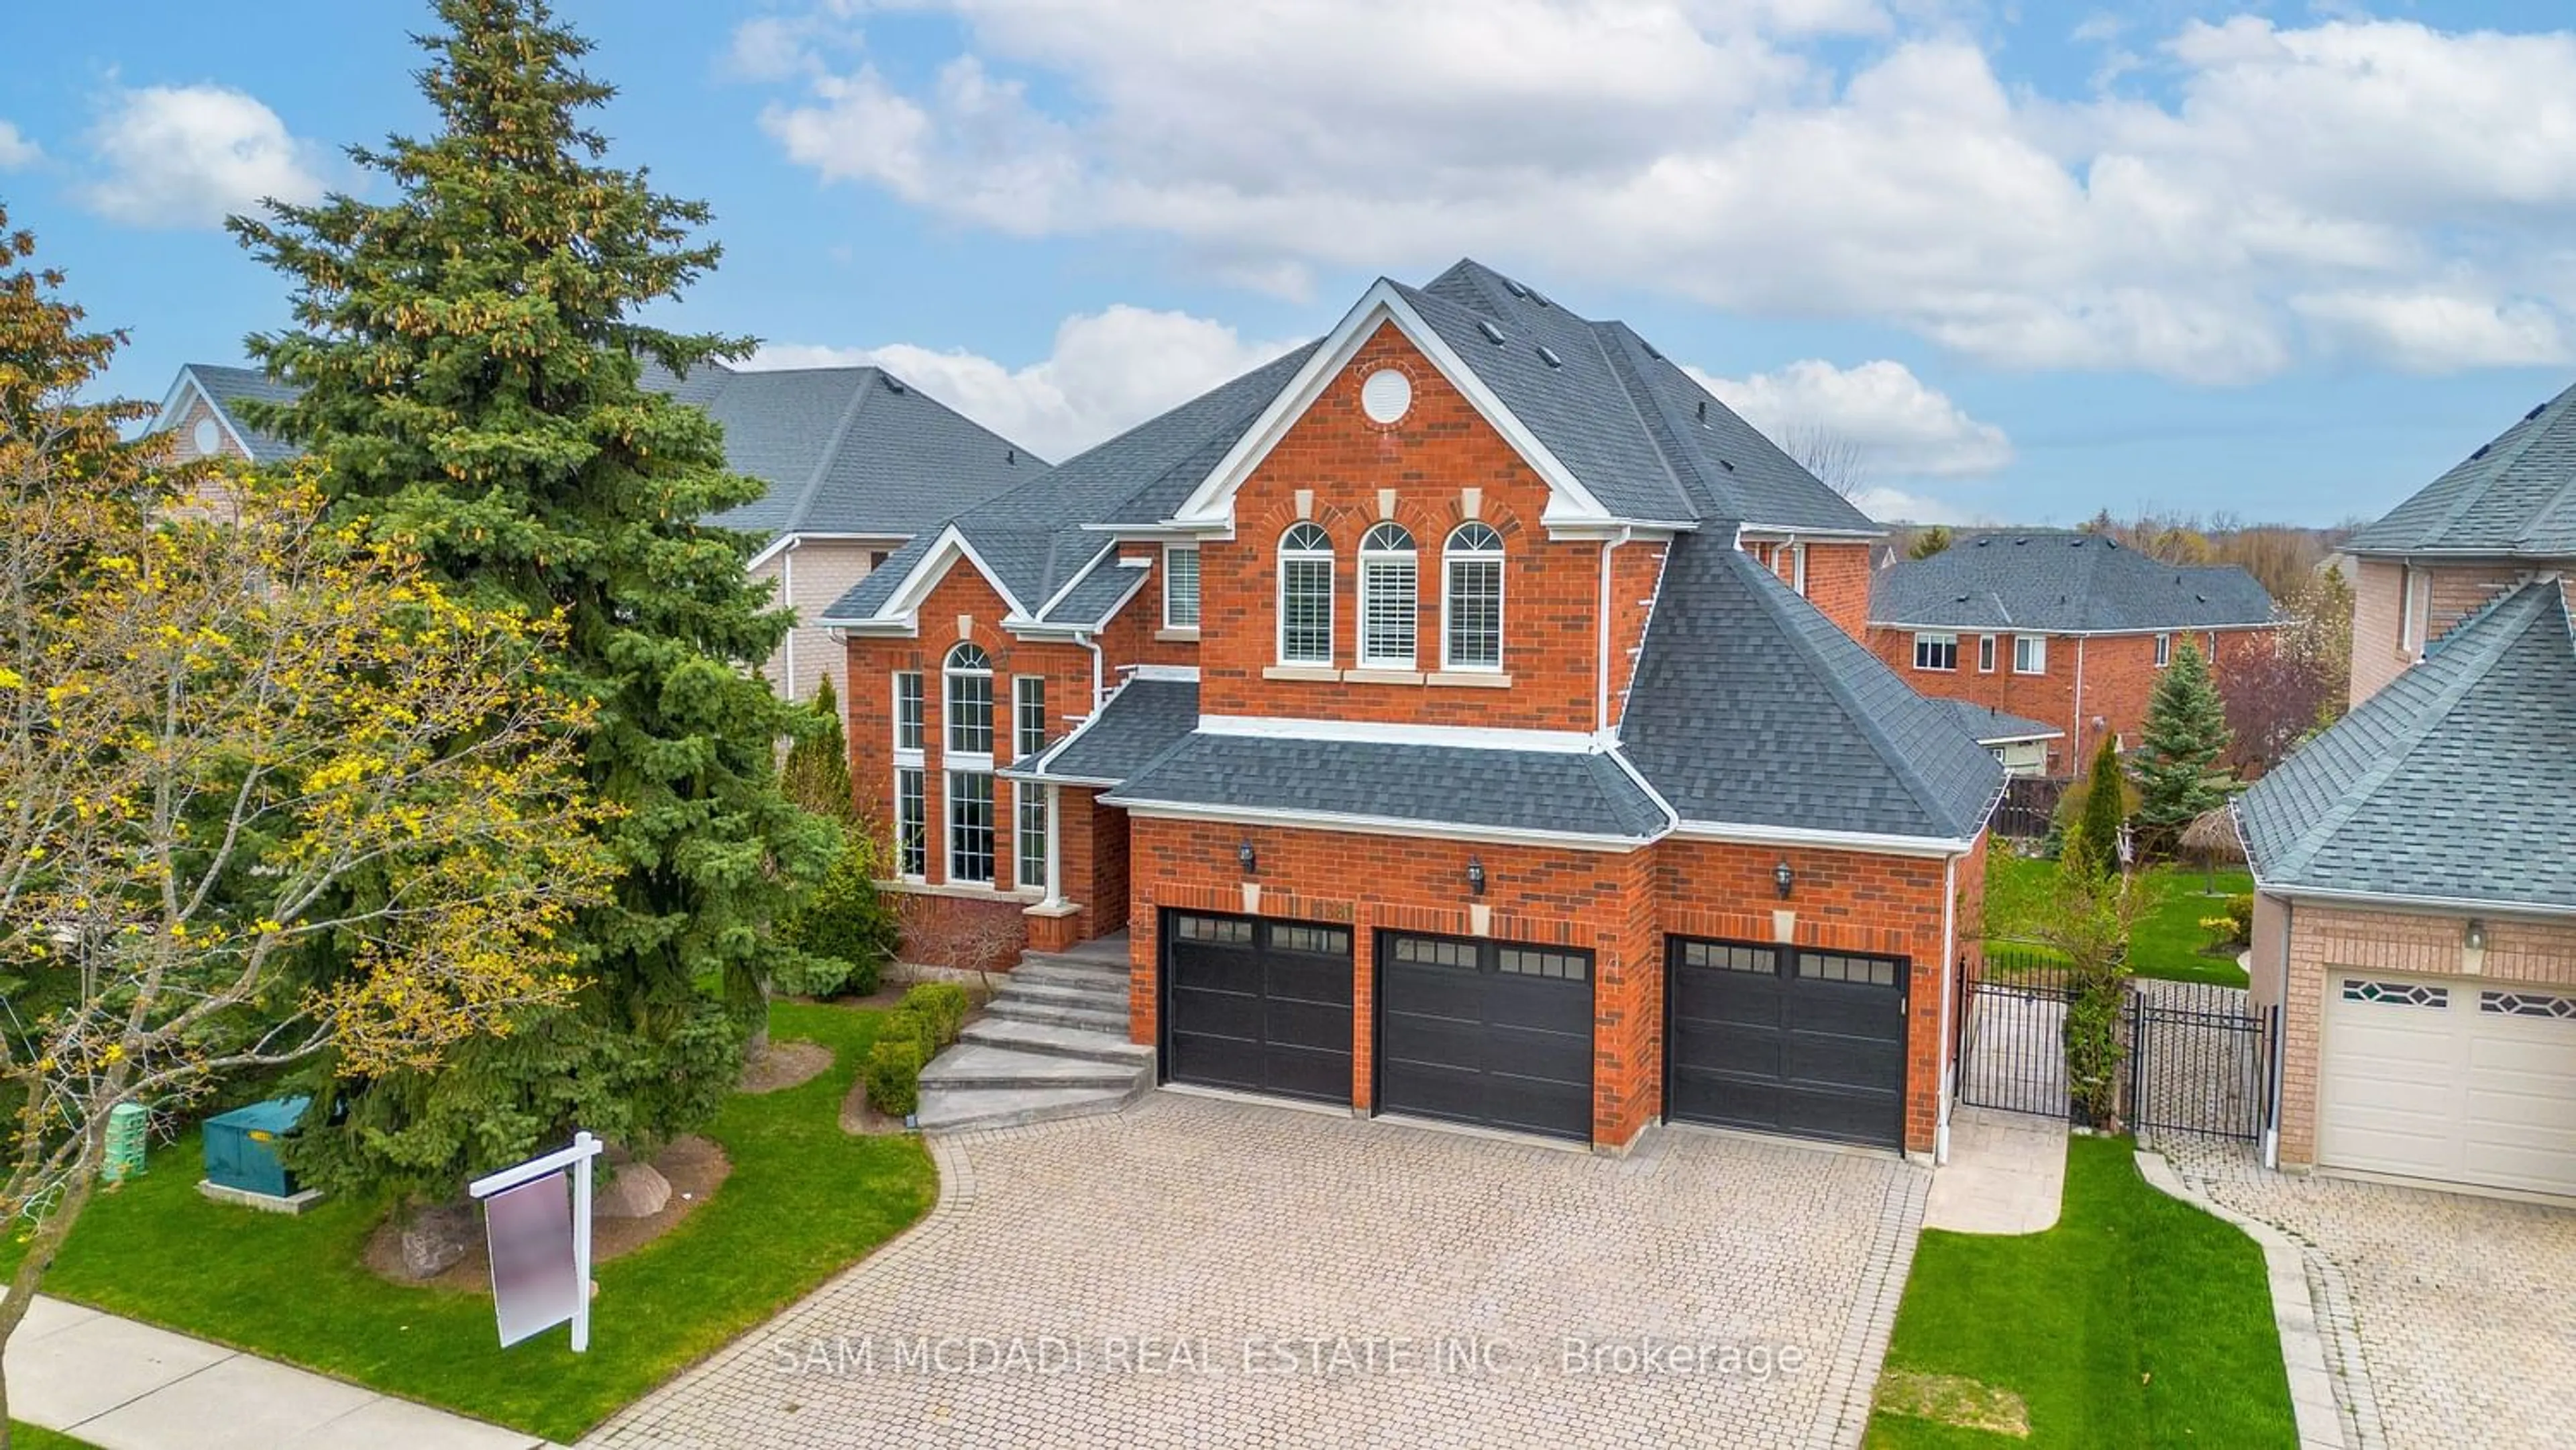 Home with brick exterior material for 5381 Forest Hill Dr, Mississauga Ontario L5M 6G9